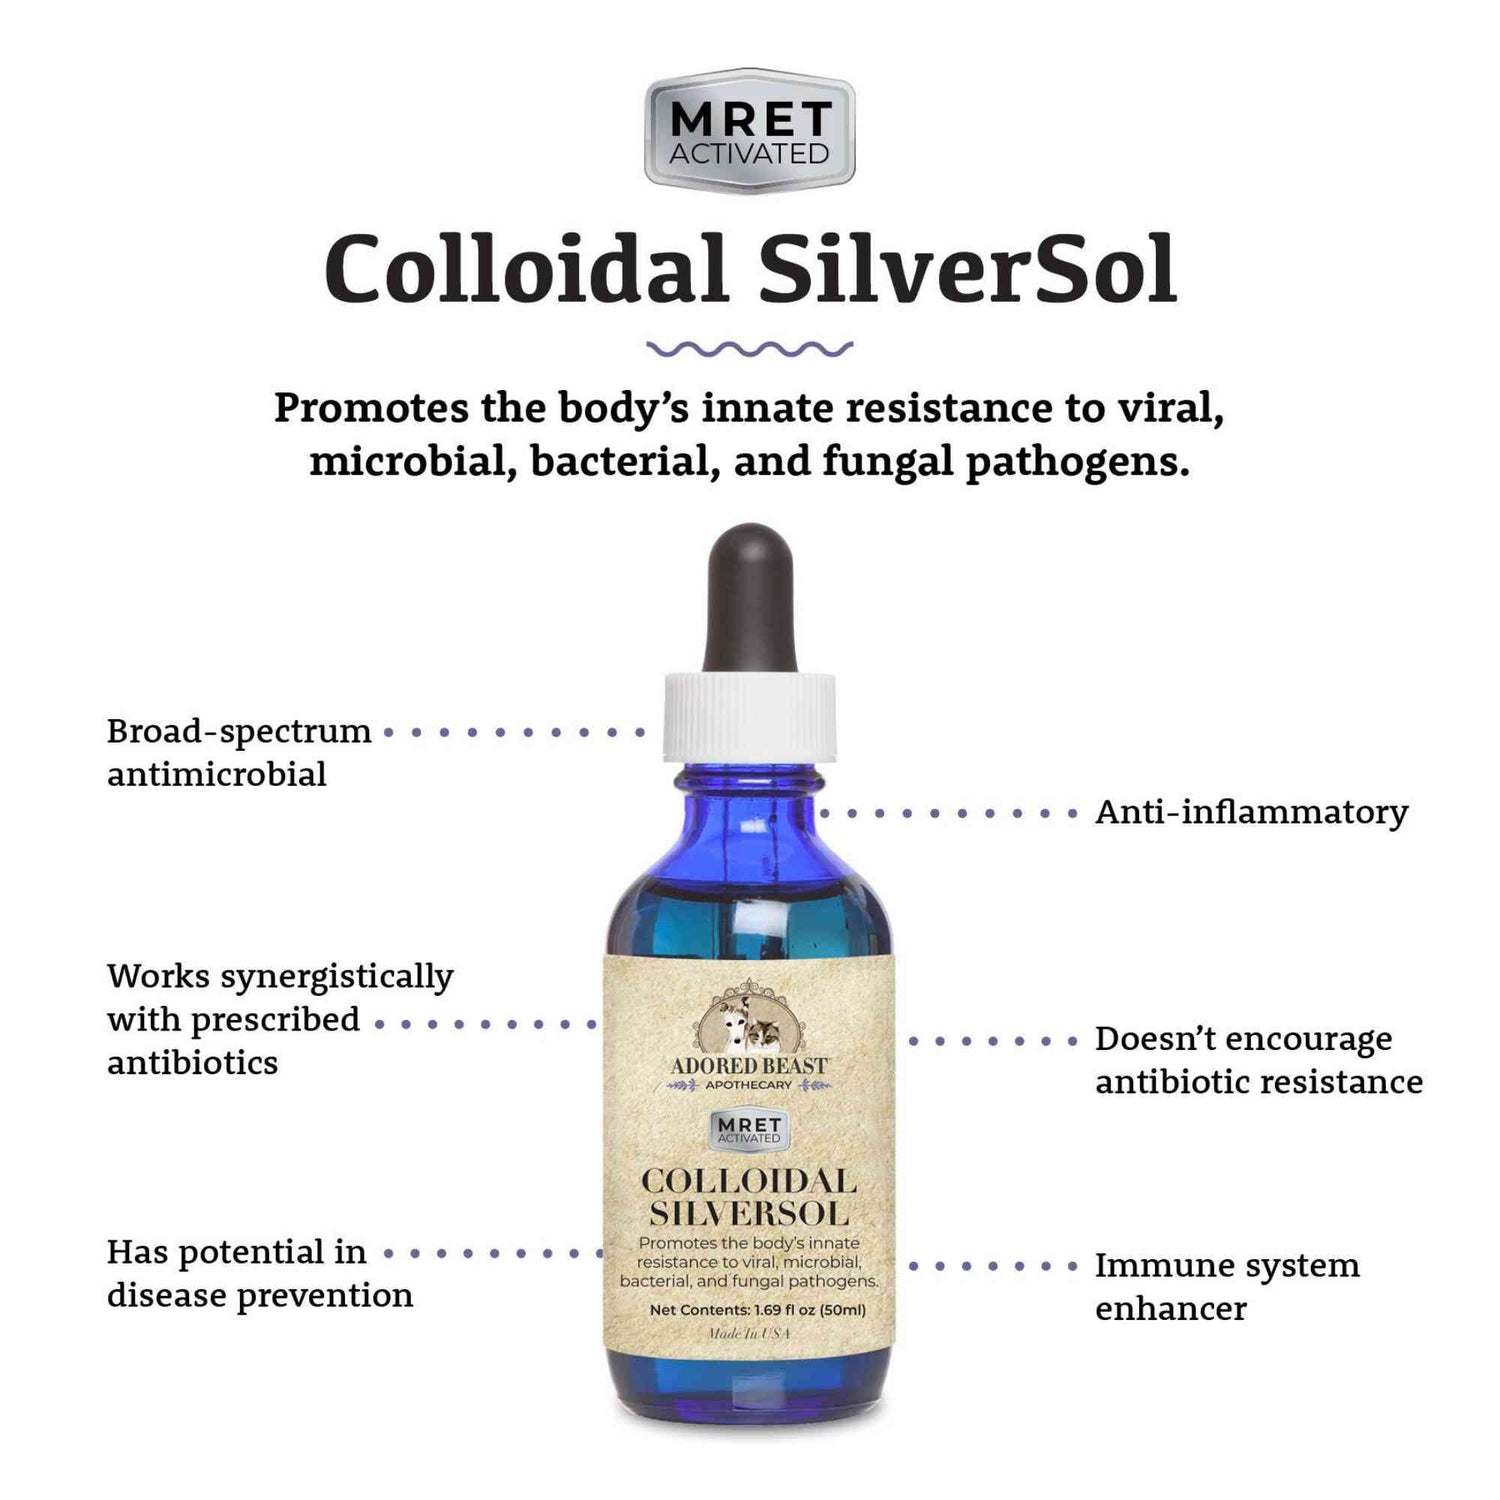 Colloidal Silversol  Adored Beast Antimicrobial Anti-inflammatory Immune System Enhancer